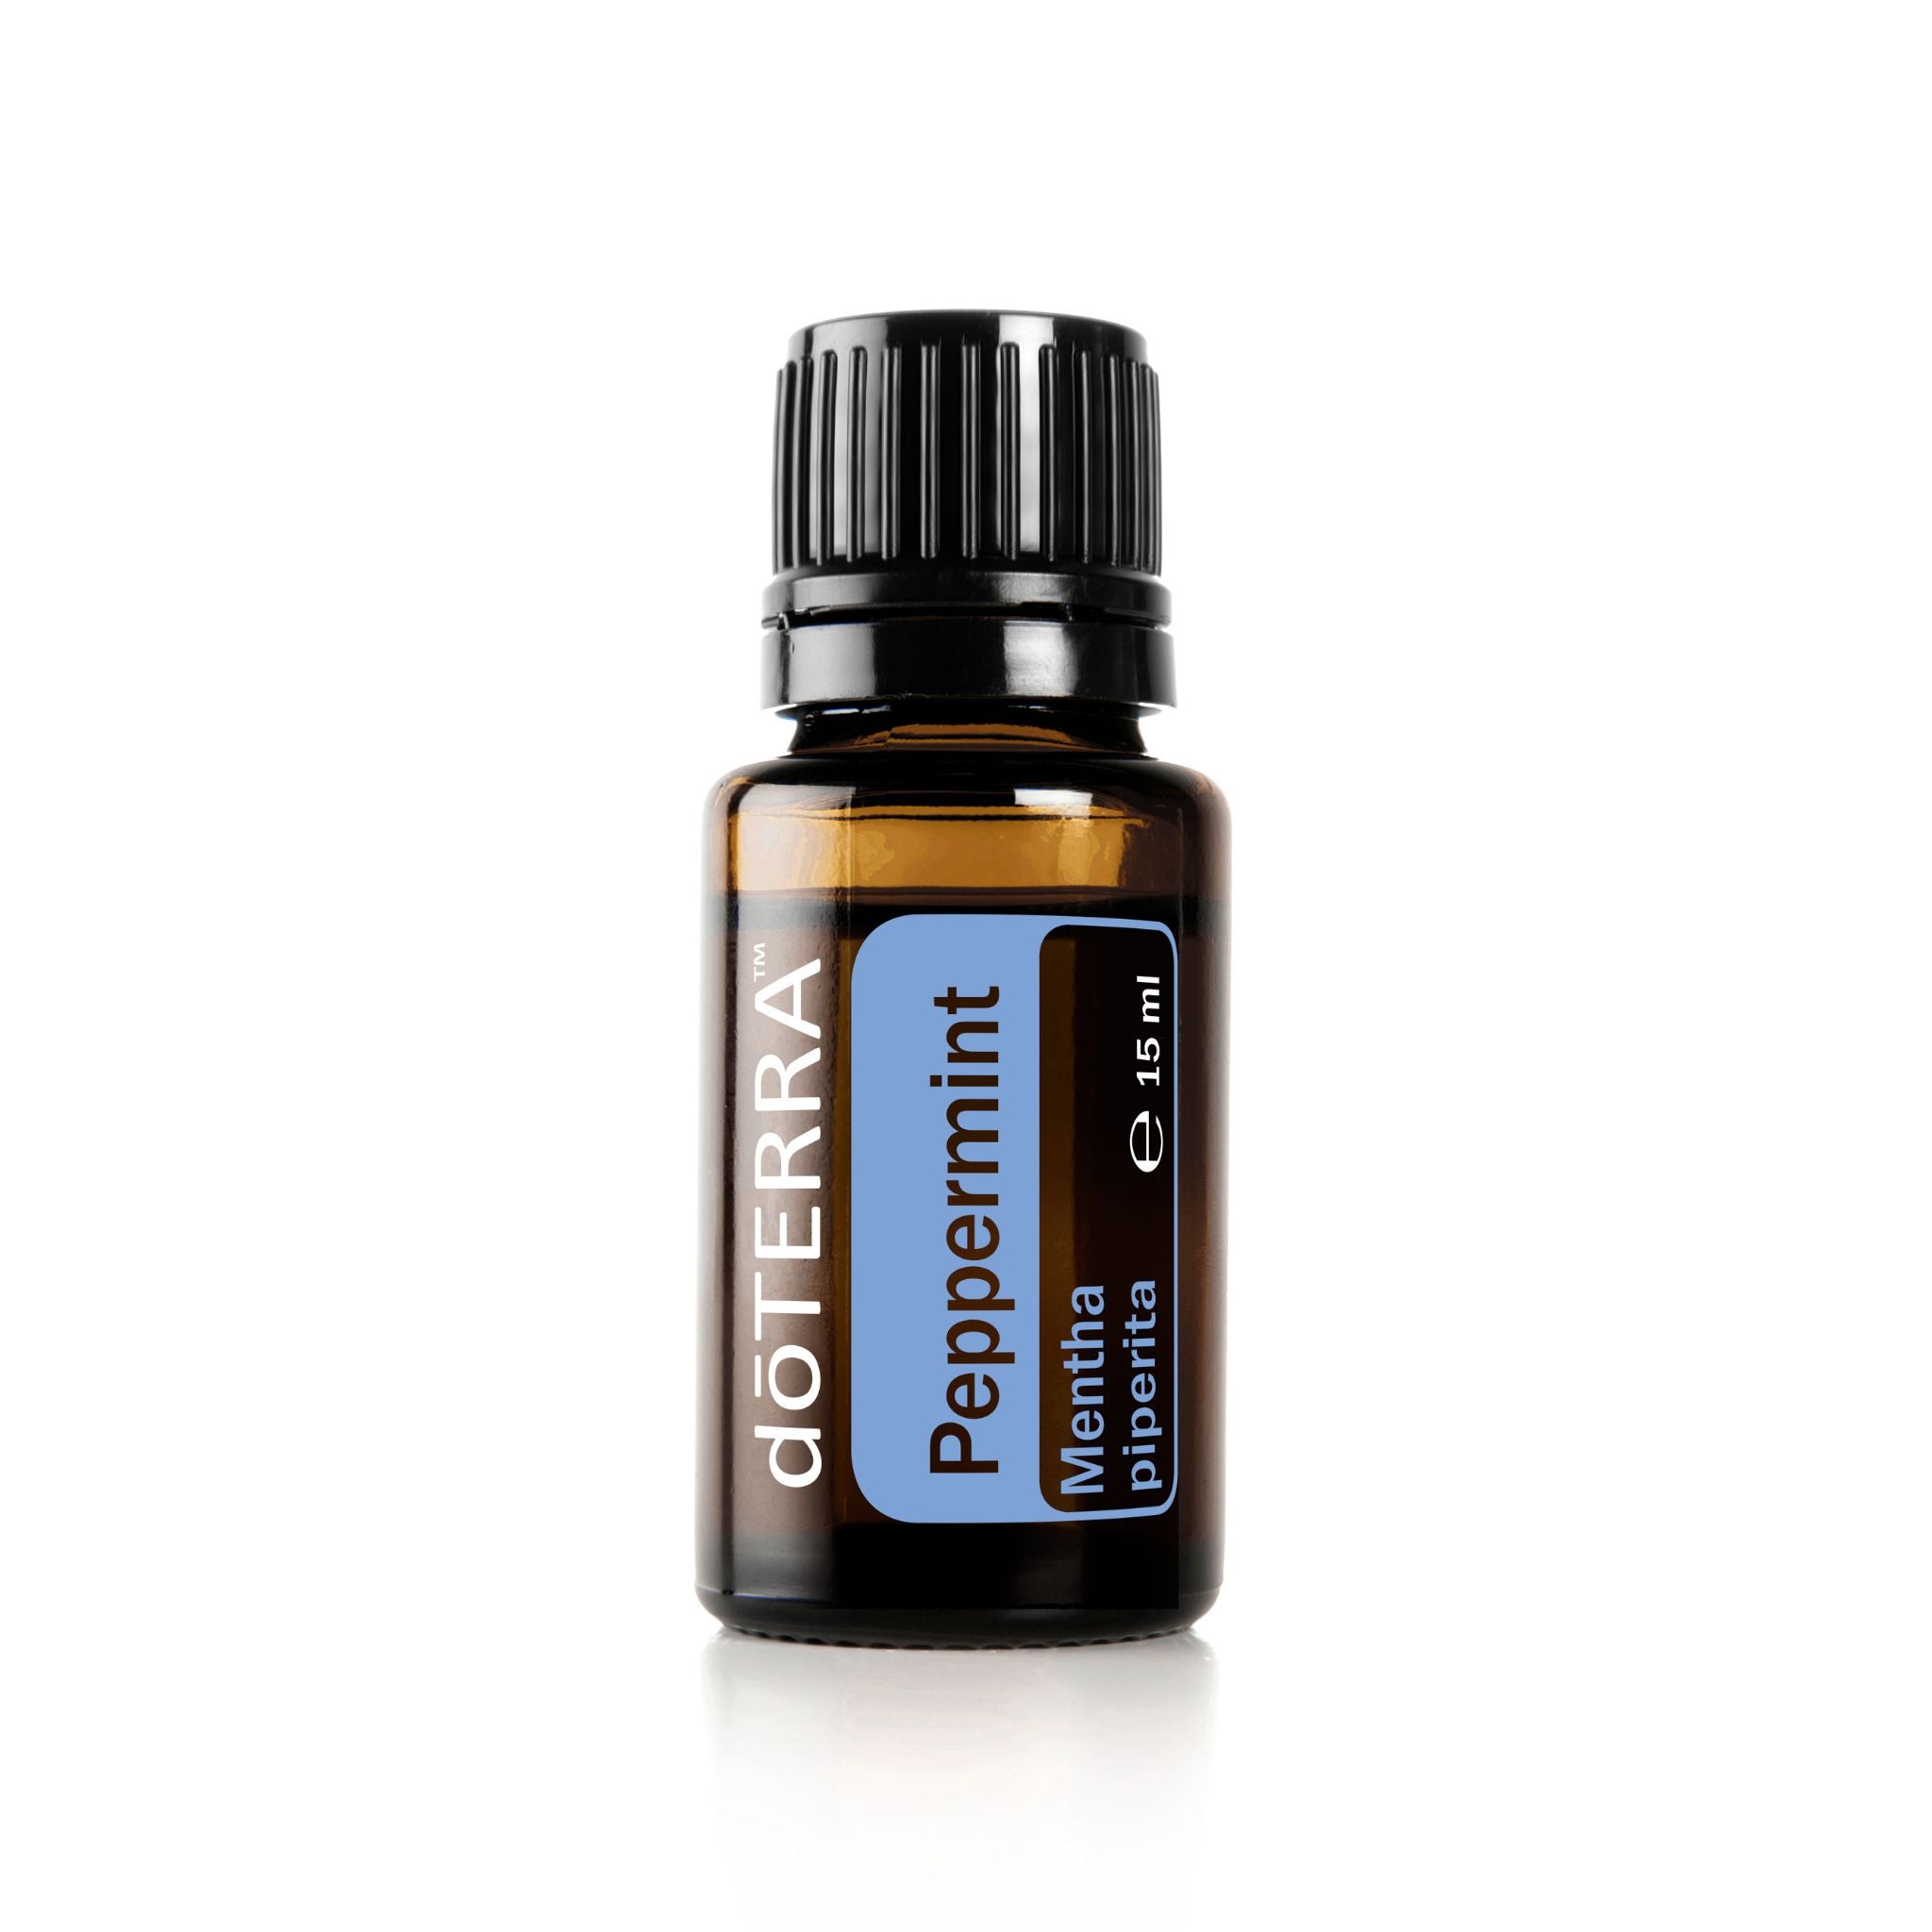 Doterra Essential Oil Singles - scent Peppermint